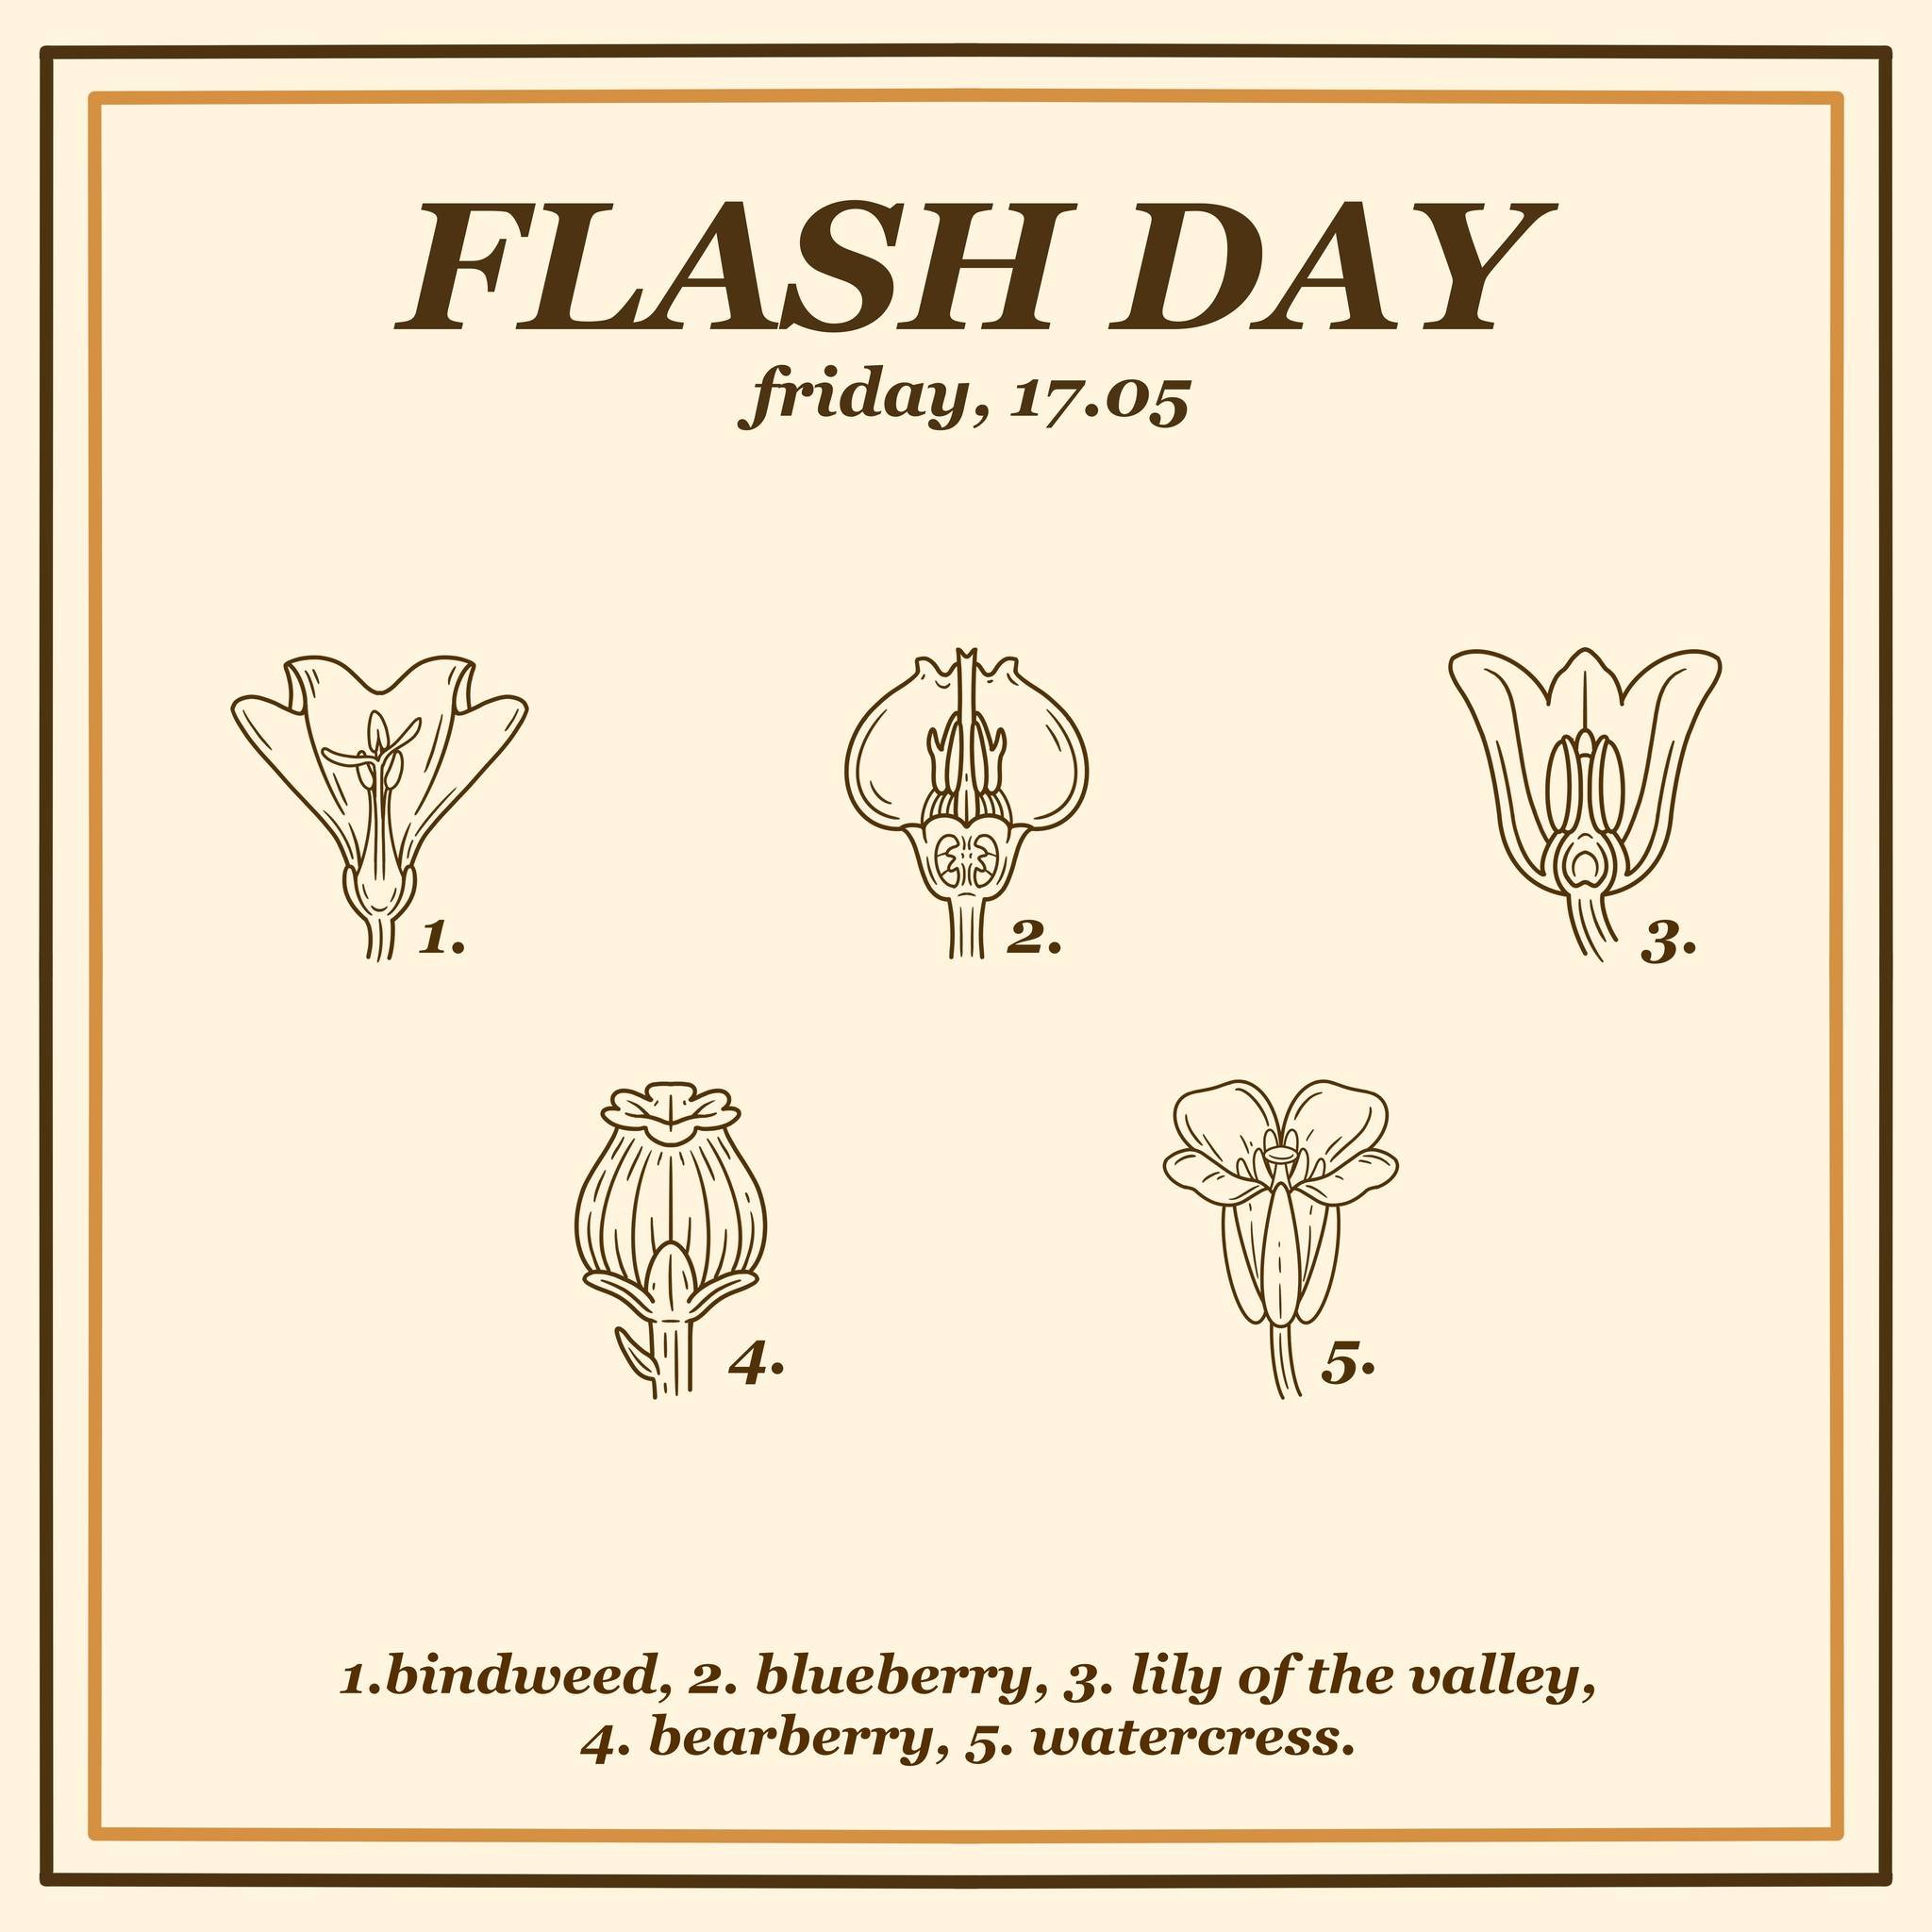 i'm holding a flash day, yay! 🌻

here's some info about it: 
- i'll be only tattooing the flash seen in this post 
- all flash is repeatable
- the sizes are set to 5-7cm, and can't be changed
- i'll be only tattooing arms and legs on this day
- the 